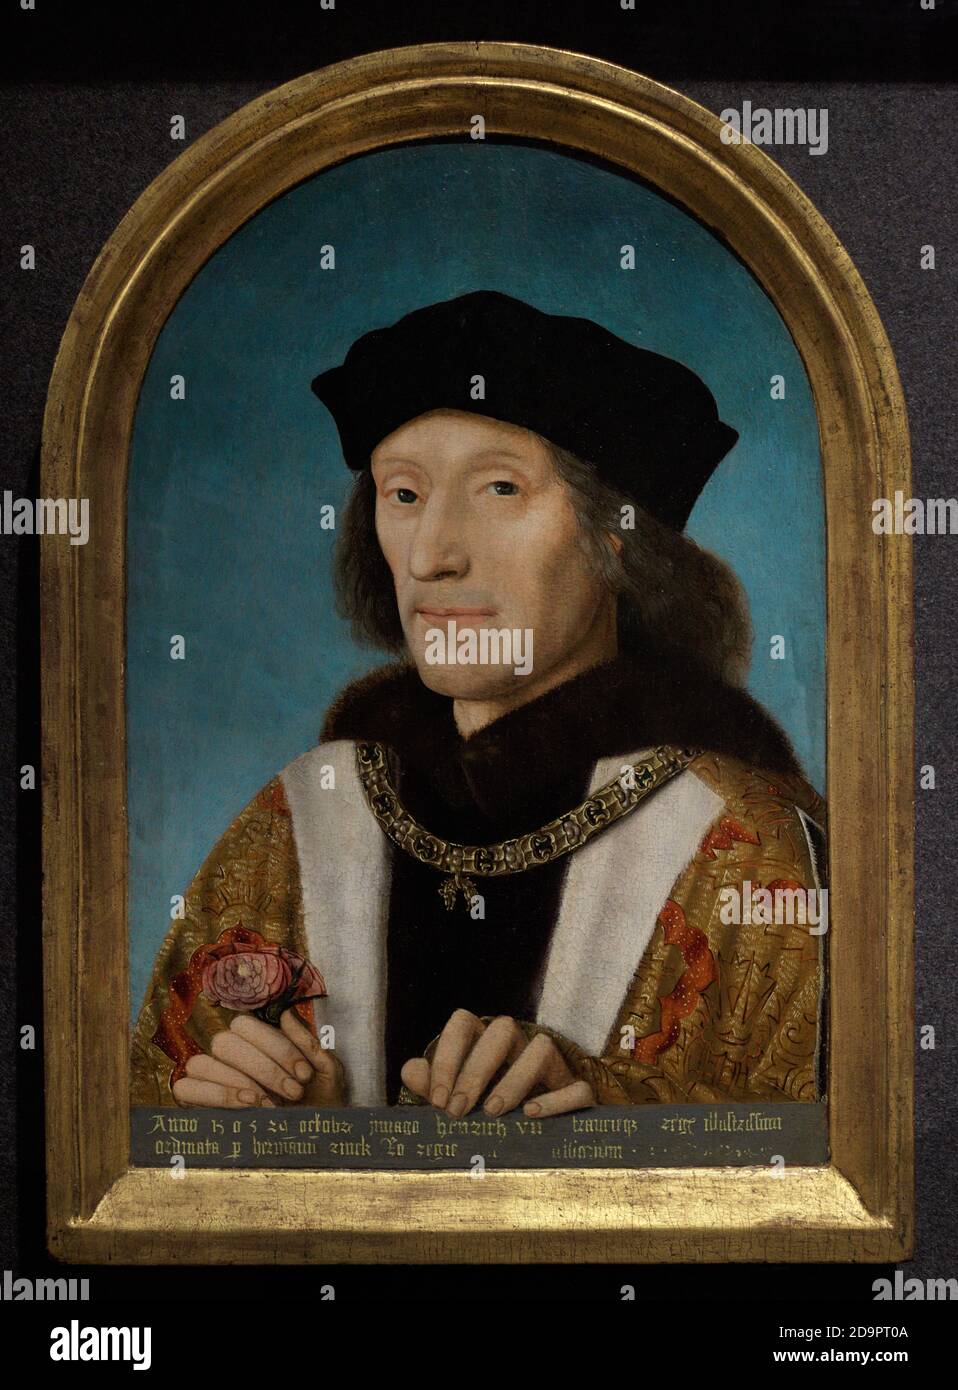 King Henry VII (1457-1509). King of Englad (1485-1509) and Lord of Ireland. He was the son of Edmund Tudor and head of the house of Lancaster. Portrait by an unknown Netherlandish artist. It was painted on October 29, 1505 by order of Herman Rinck, an agent for the Holy Roman Emperor, Maximilian I. Oil on panel (42,5 x 30,5 cm), 1505. National Portrait Gallery. London, England, United Kingdom. Stock Photo